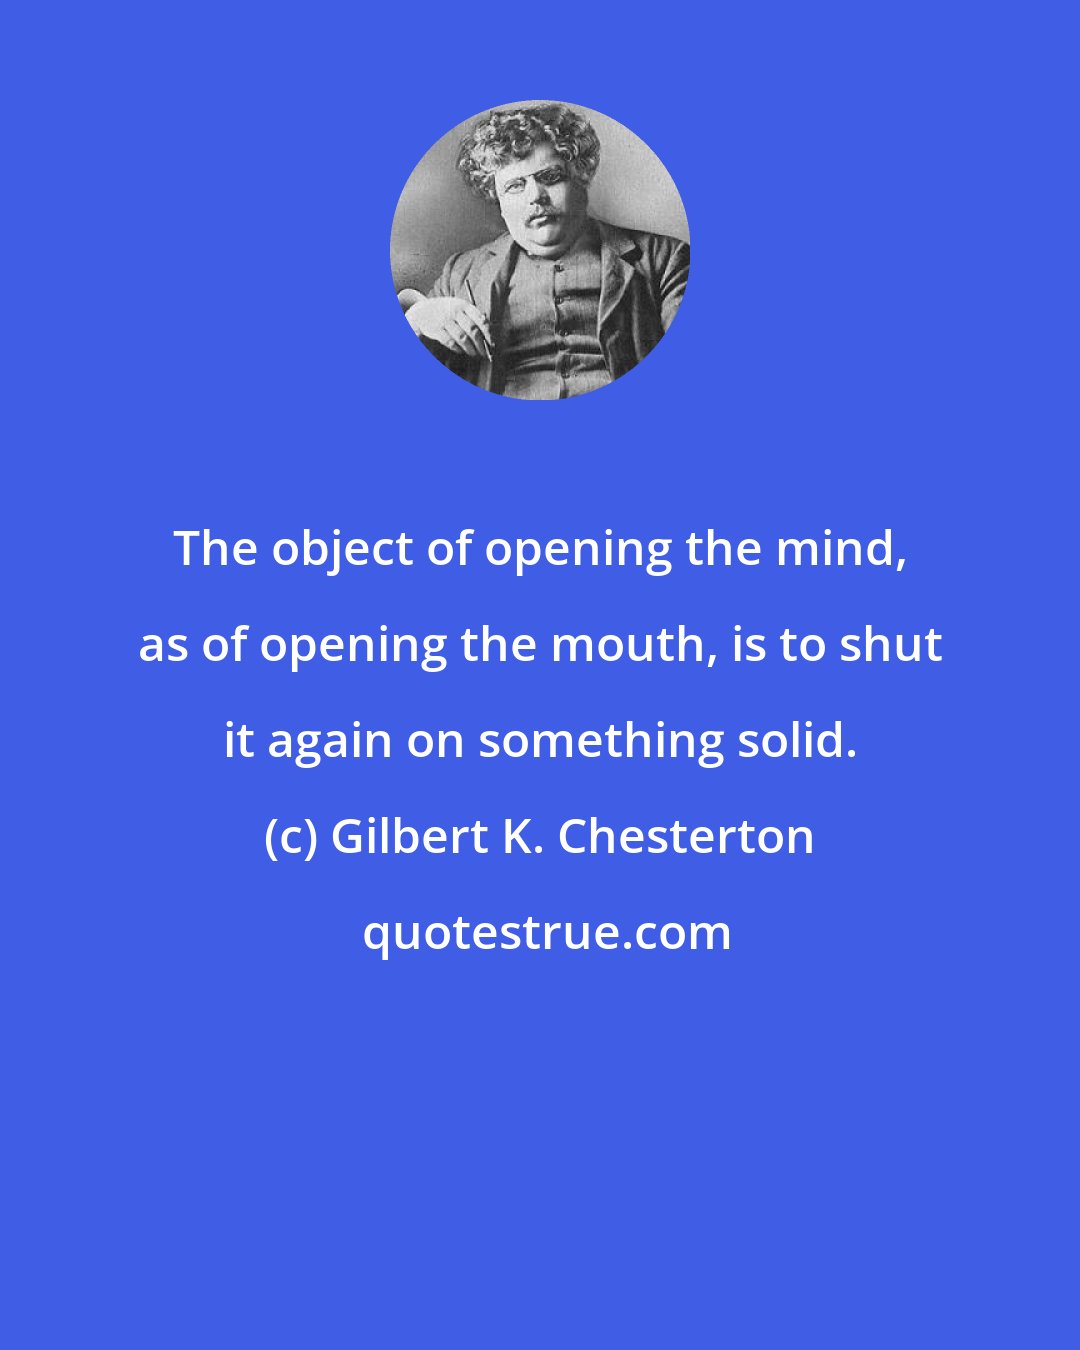 Gilbert K. Chesterton: The object of opening the mind, as of opening the mouth, is to shut it again on something solid.